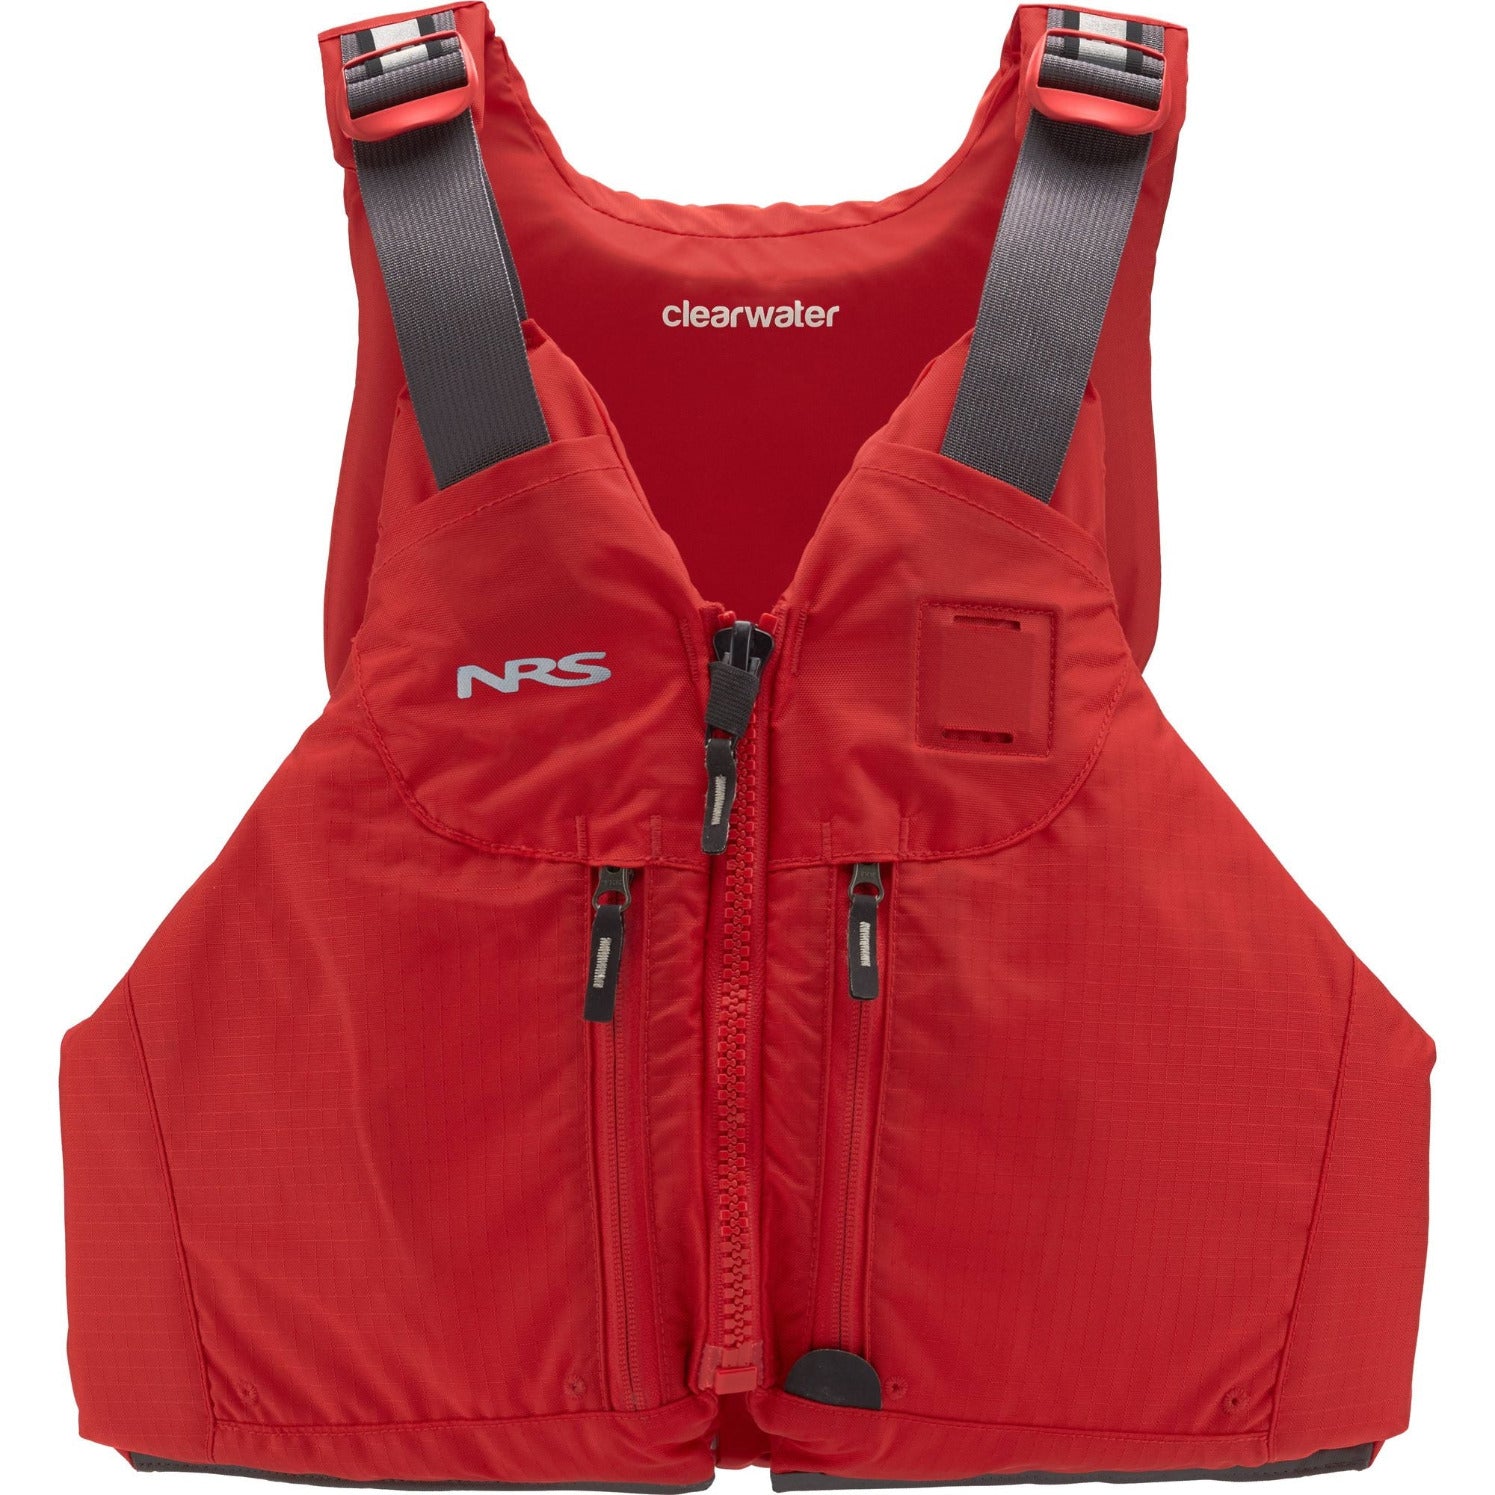 NRS Clearwater Buoyancy Aids for Sale